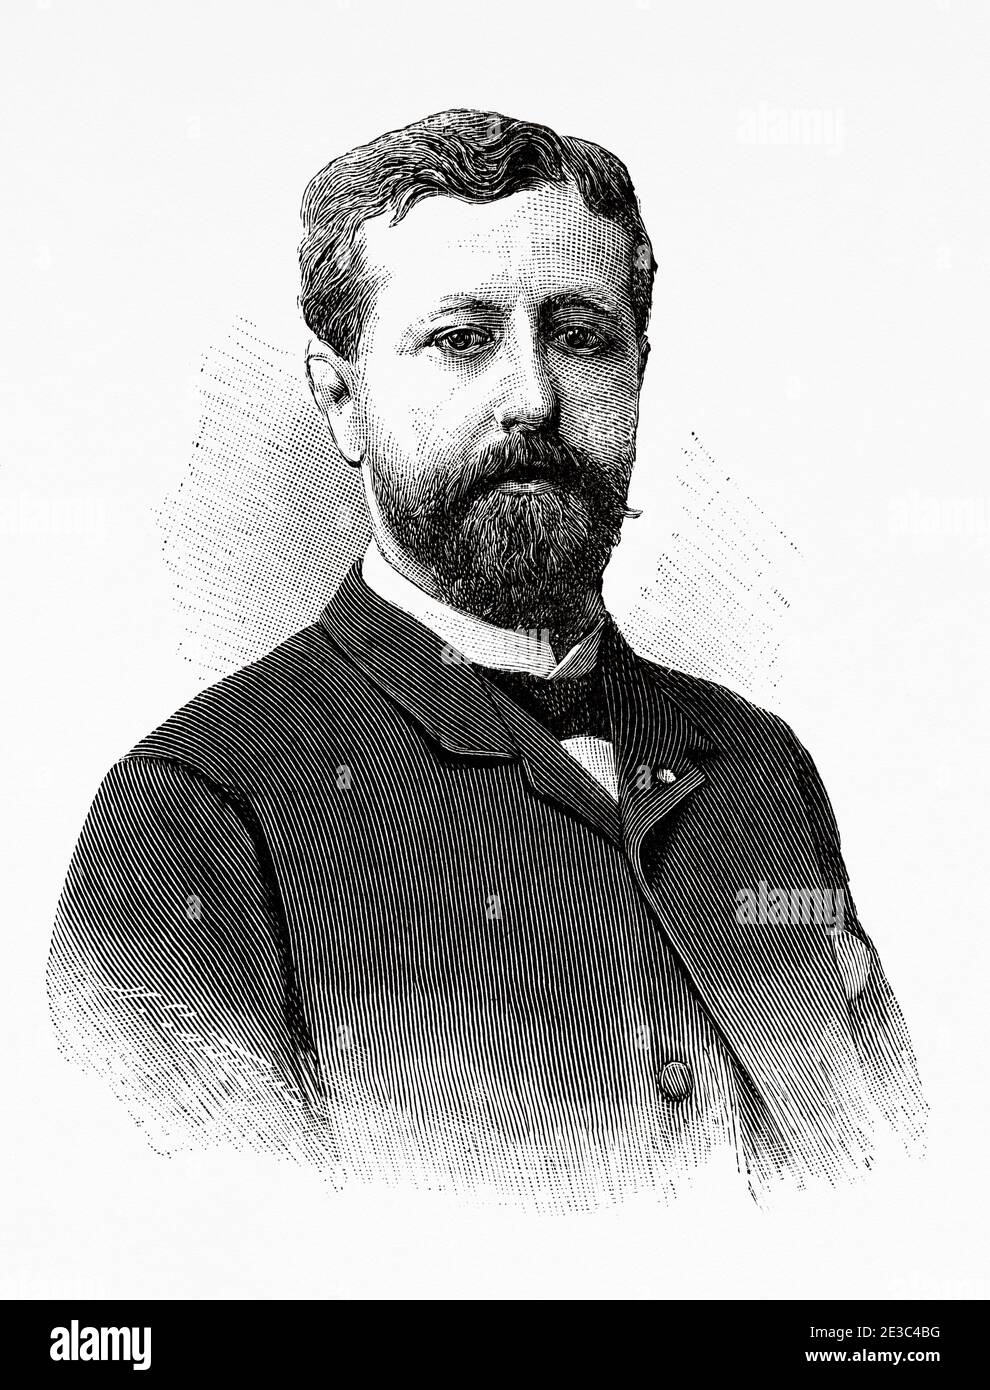 Portrait of Claudius Chervin, 1824-1896 French specialist in speech impediments, educationalist and therapist, founder of Institute of Stammering in Paris, France. Old XIX century engraved illustration from La Ilustracion Española y Americana 1894 Stock Photo